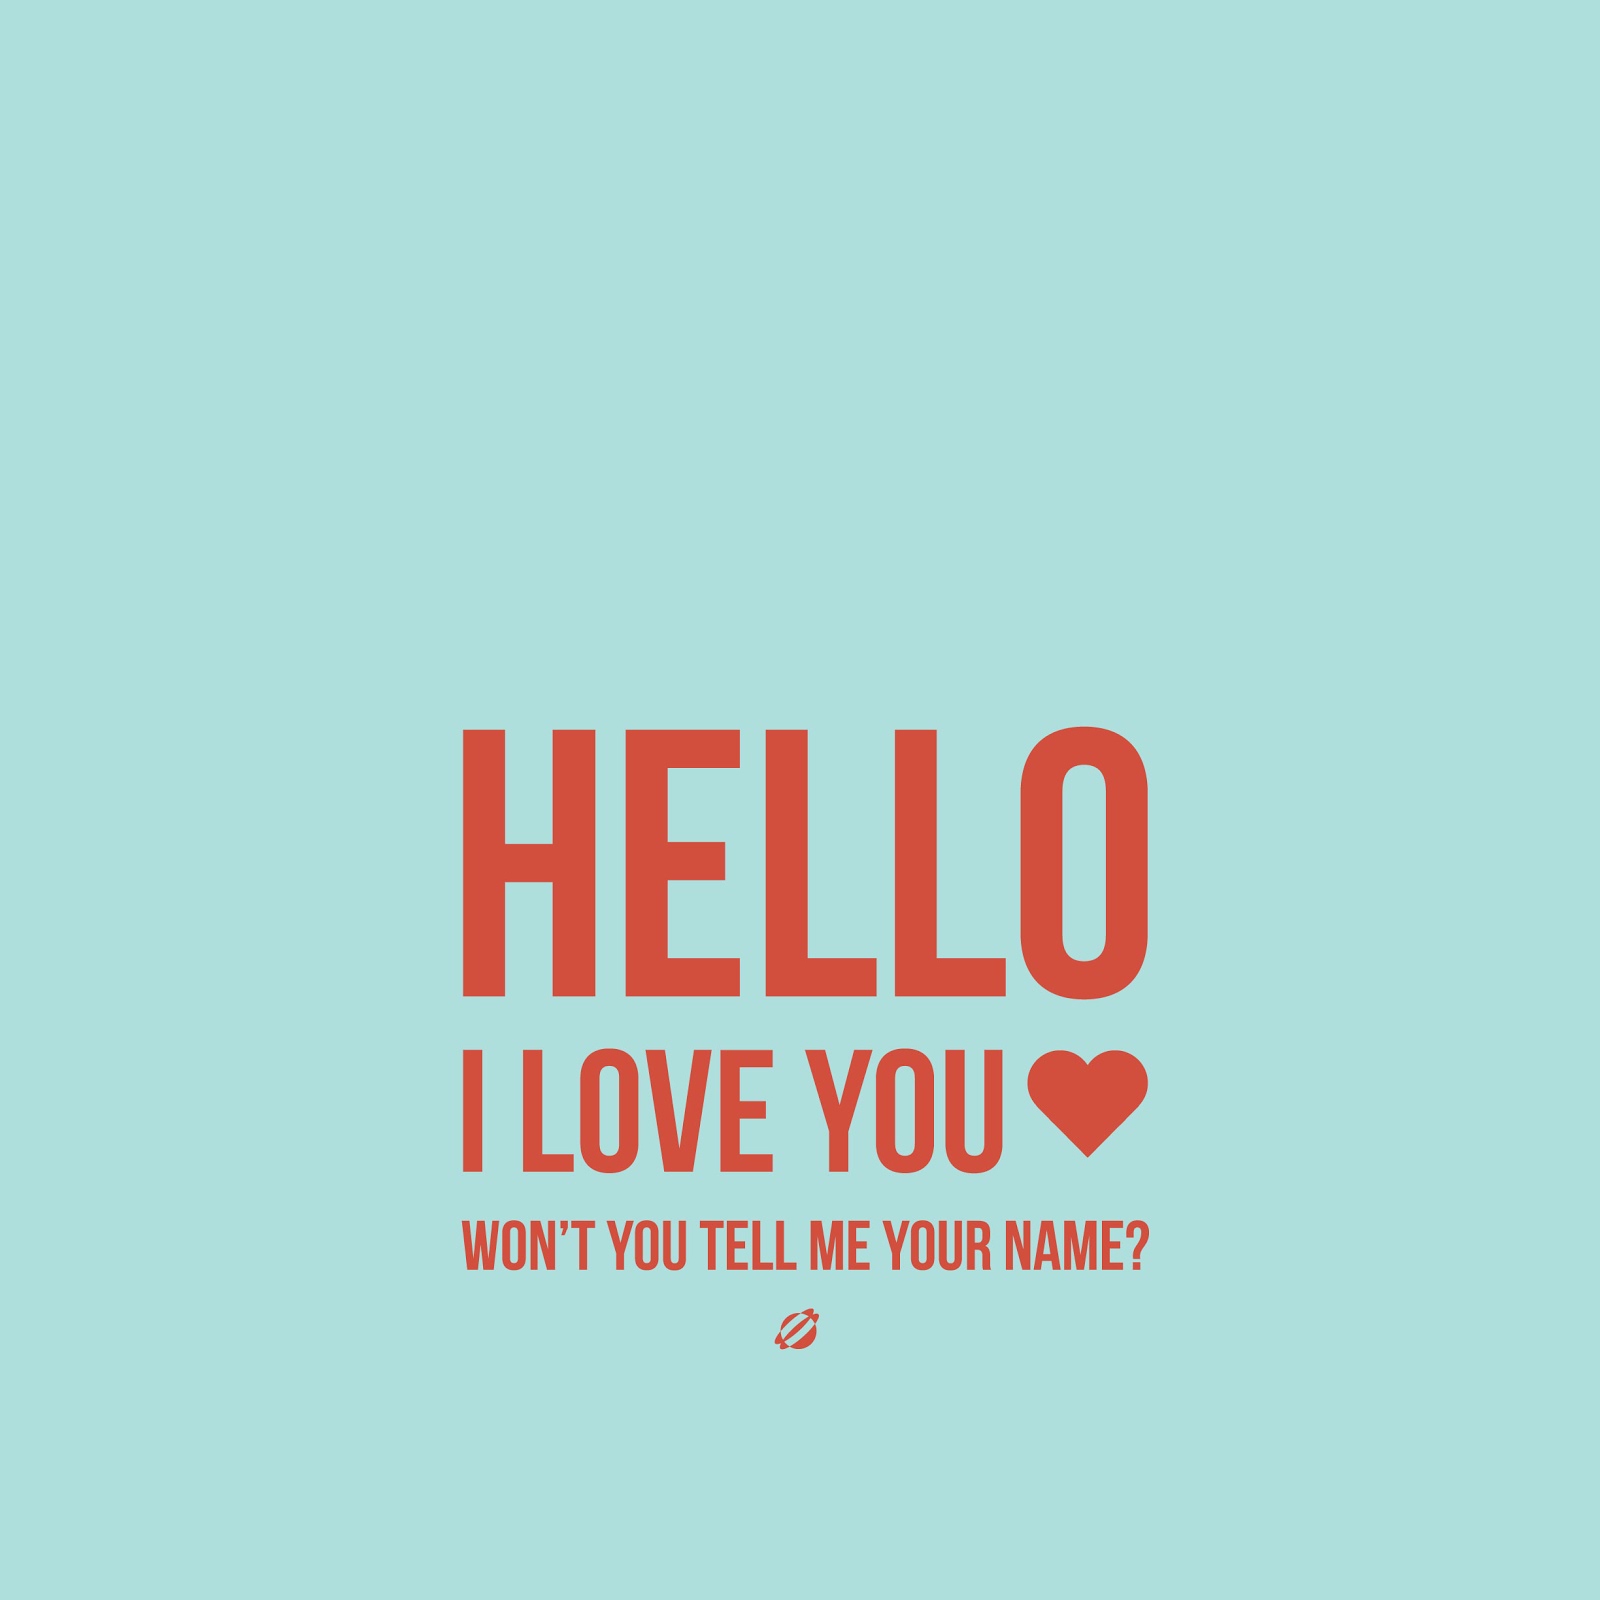 Download Hello I Am Your Wallpaper And I Love You